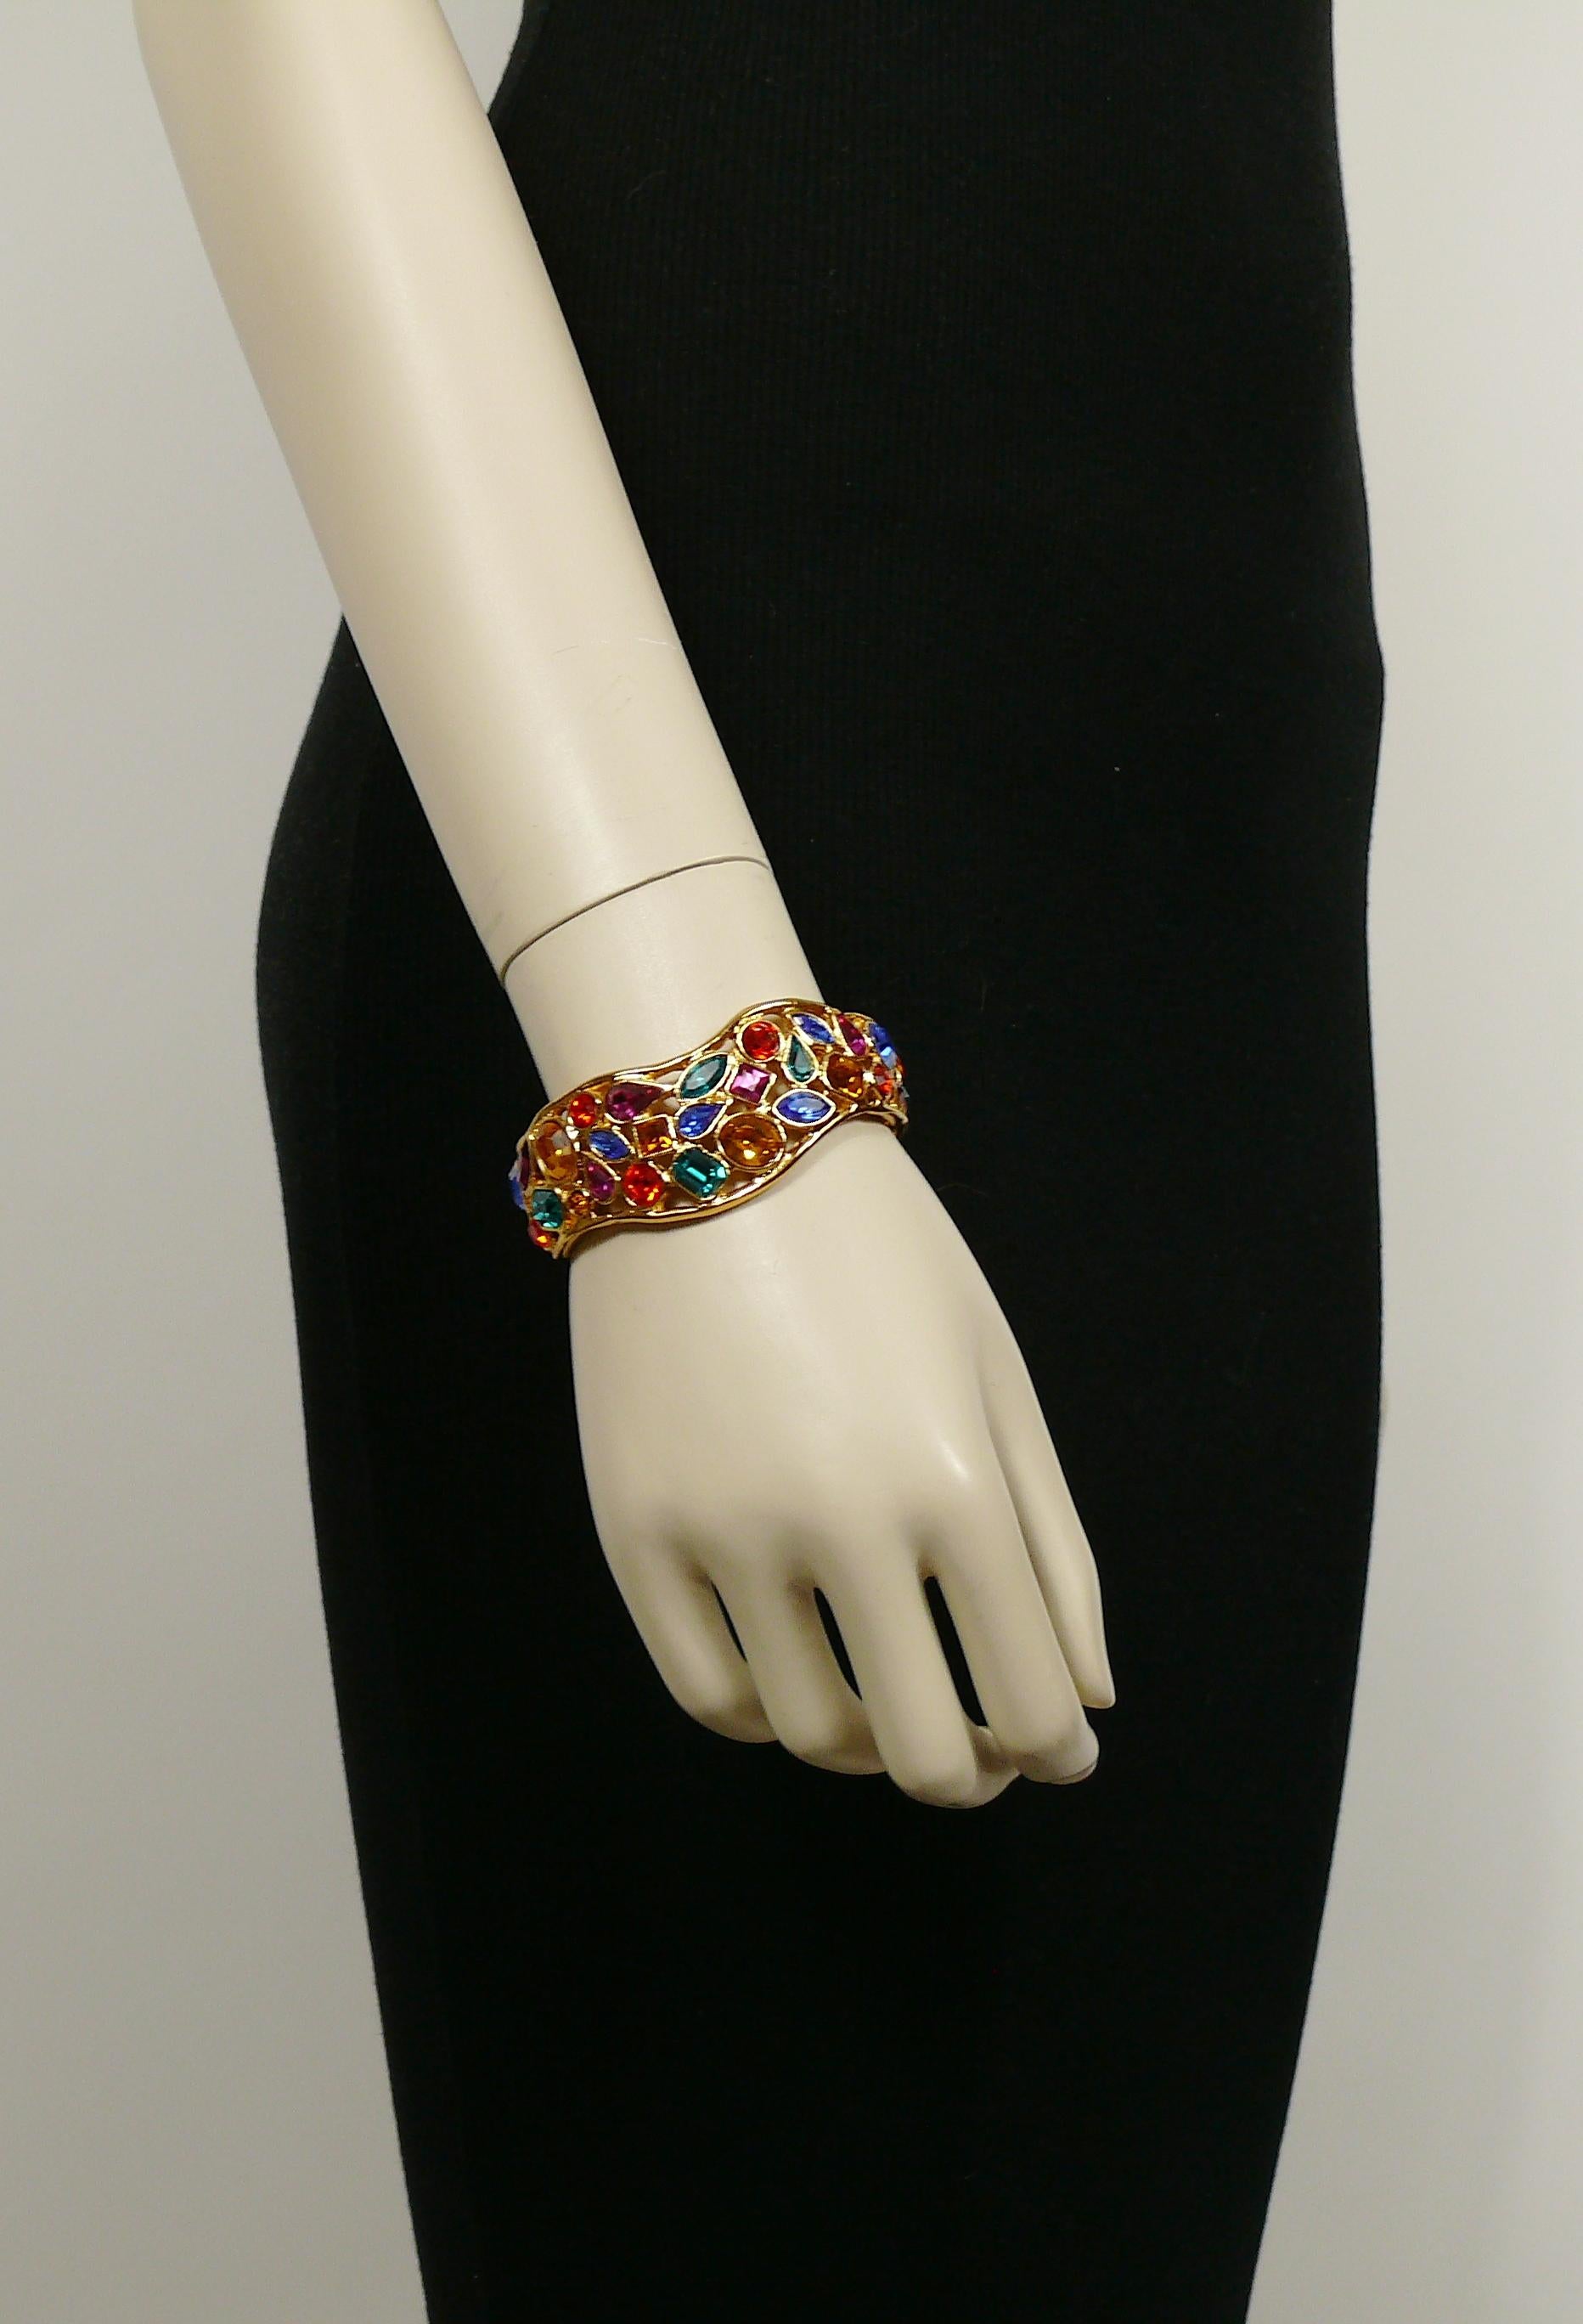 YVES SAINT LAURENT vintage openwork gold toned cuff bracelet embellished with multicolored crystals.

Marked YSL Made in France.

Indicative measurements : inner measurements approx. 6 cm x 5.3 cm (2.36 inches x 2.09 inches) / max. width approx. 2.5